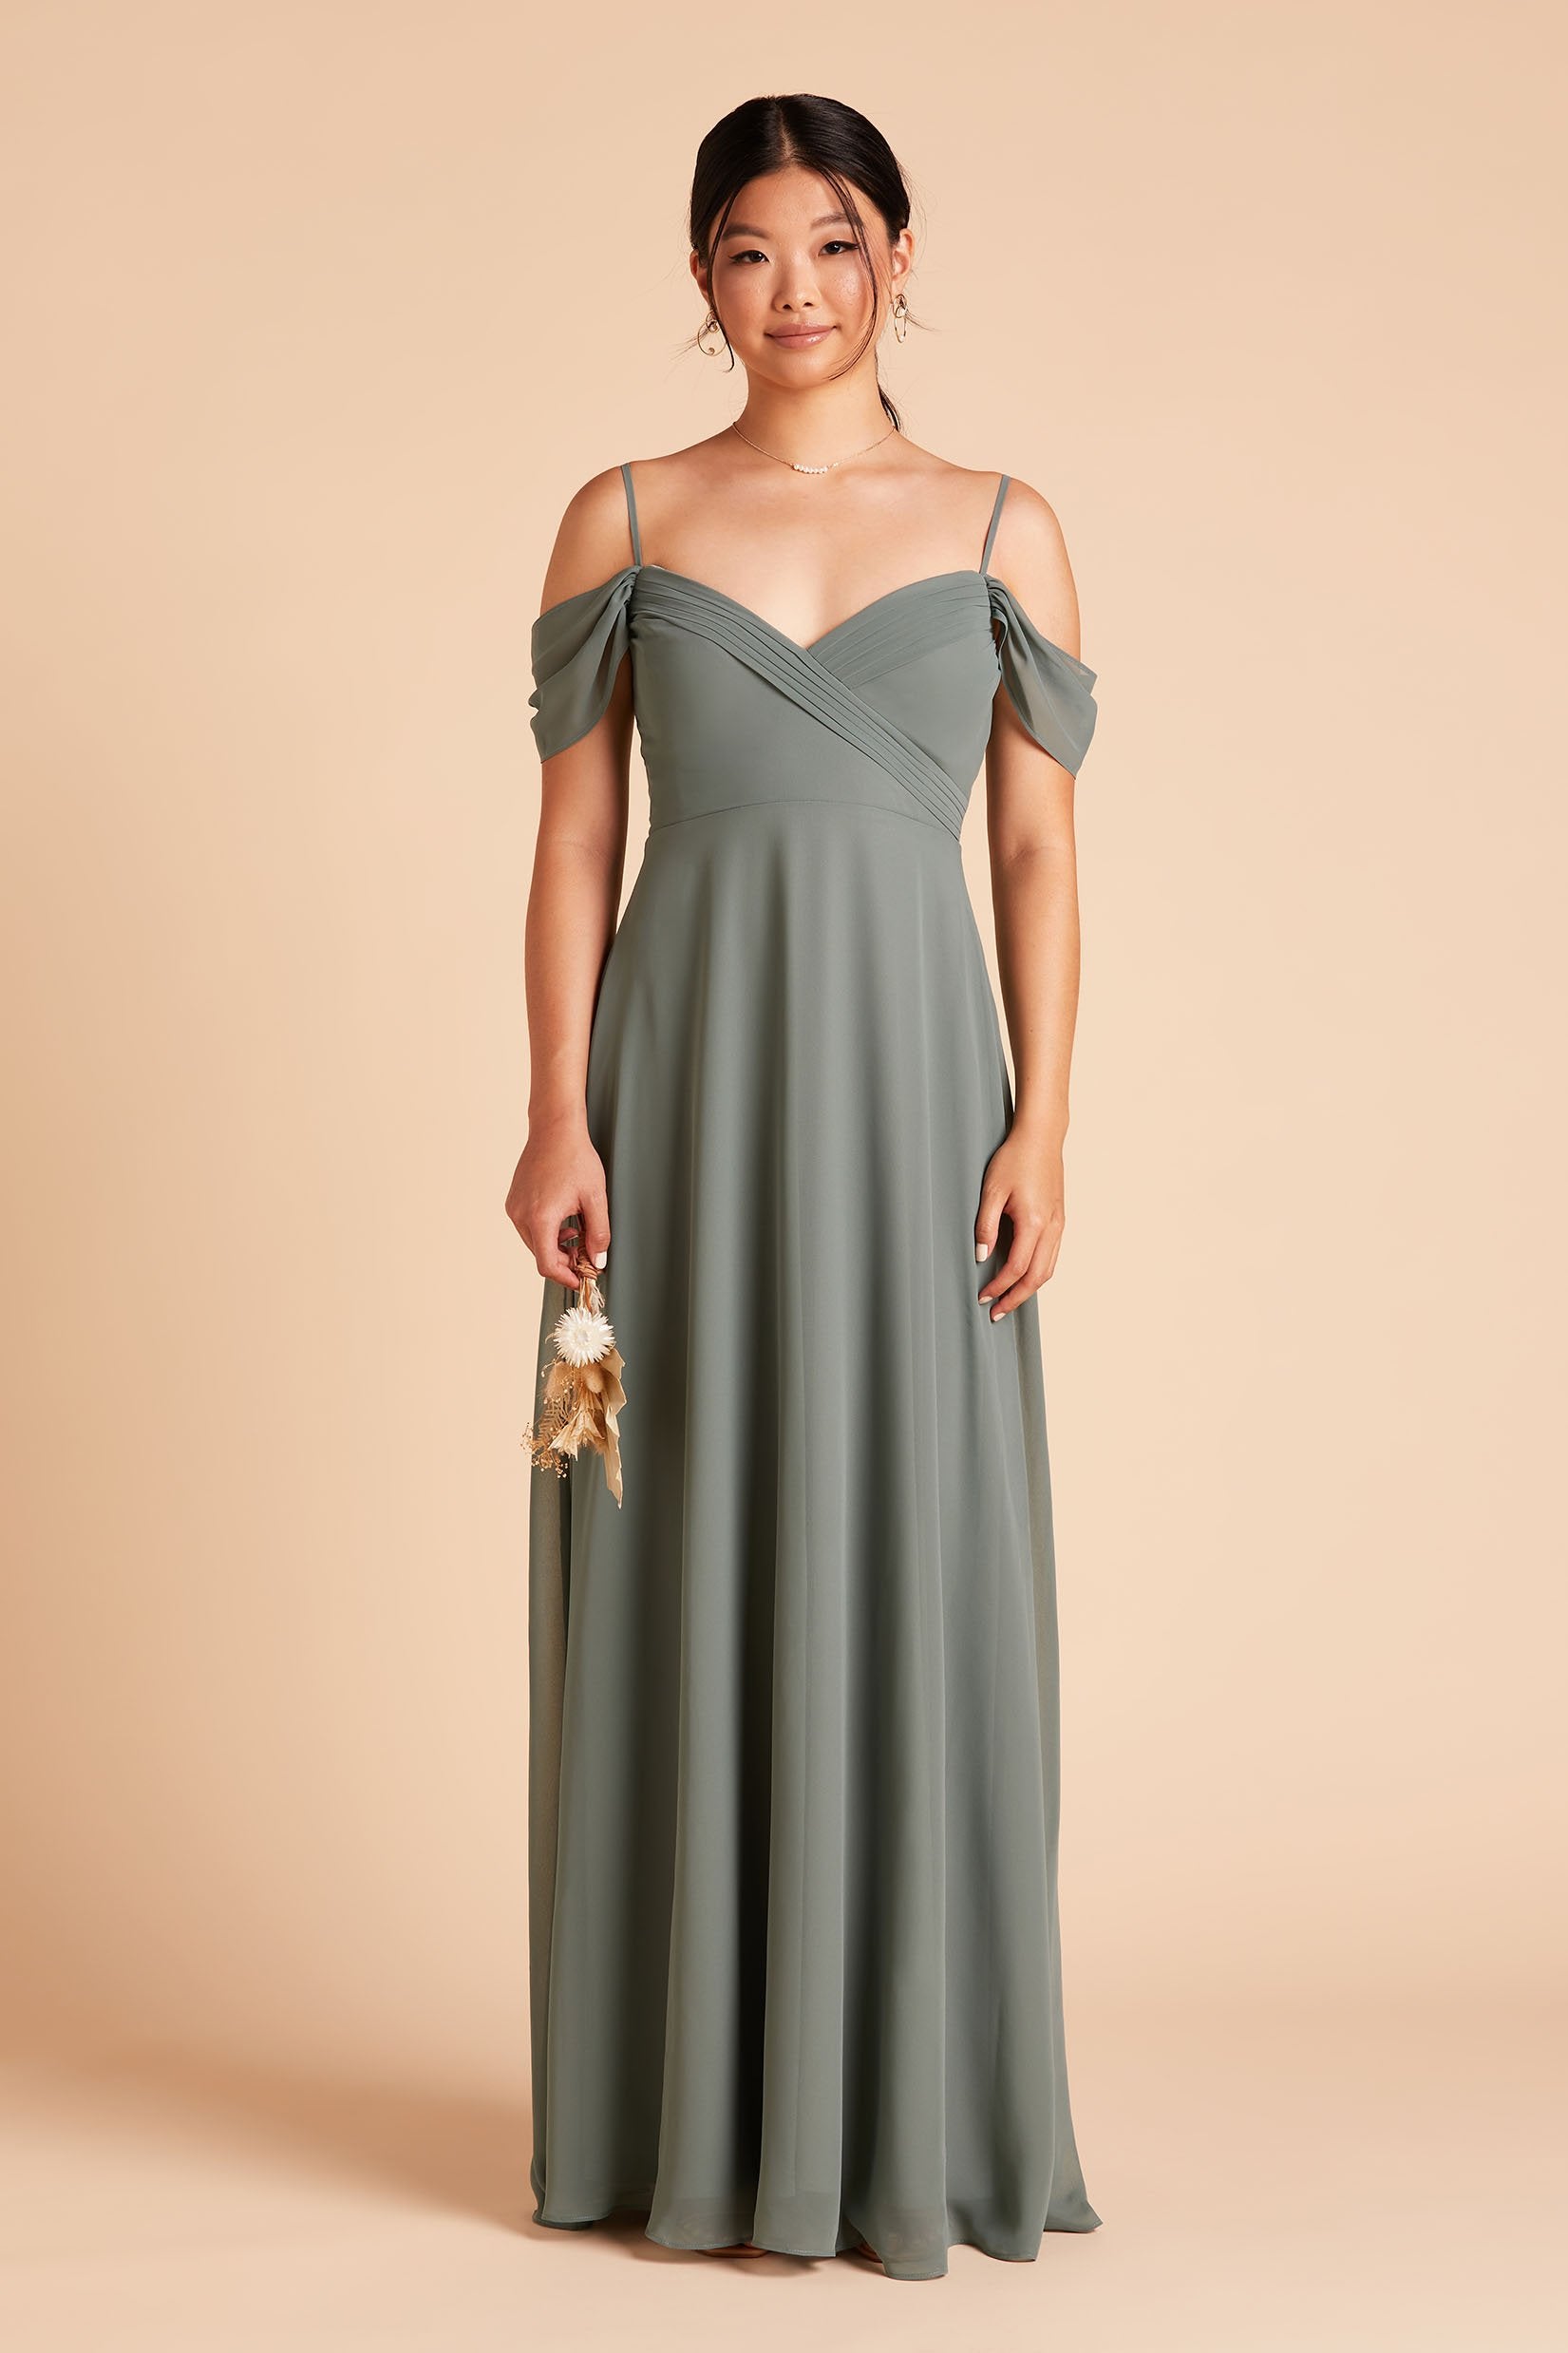 Spence convertible bridesmaid dress in sea glass green chiffon by Birdy Grey, front view